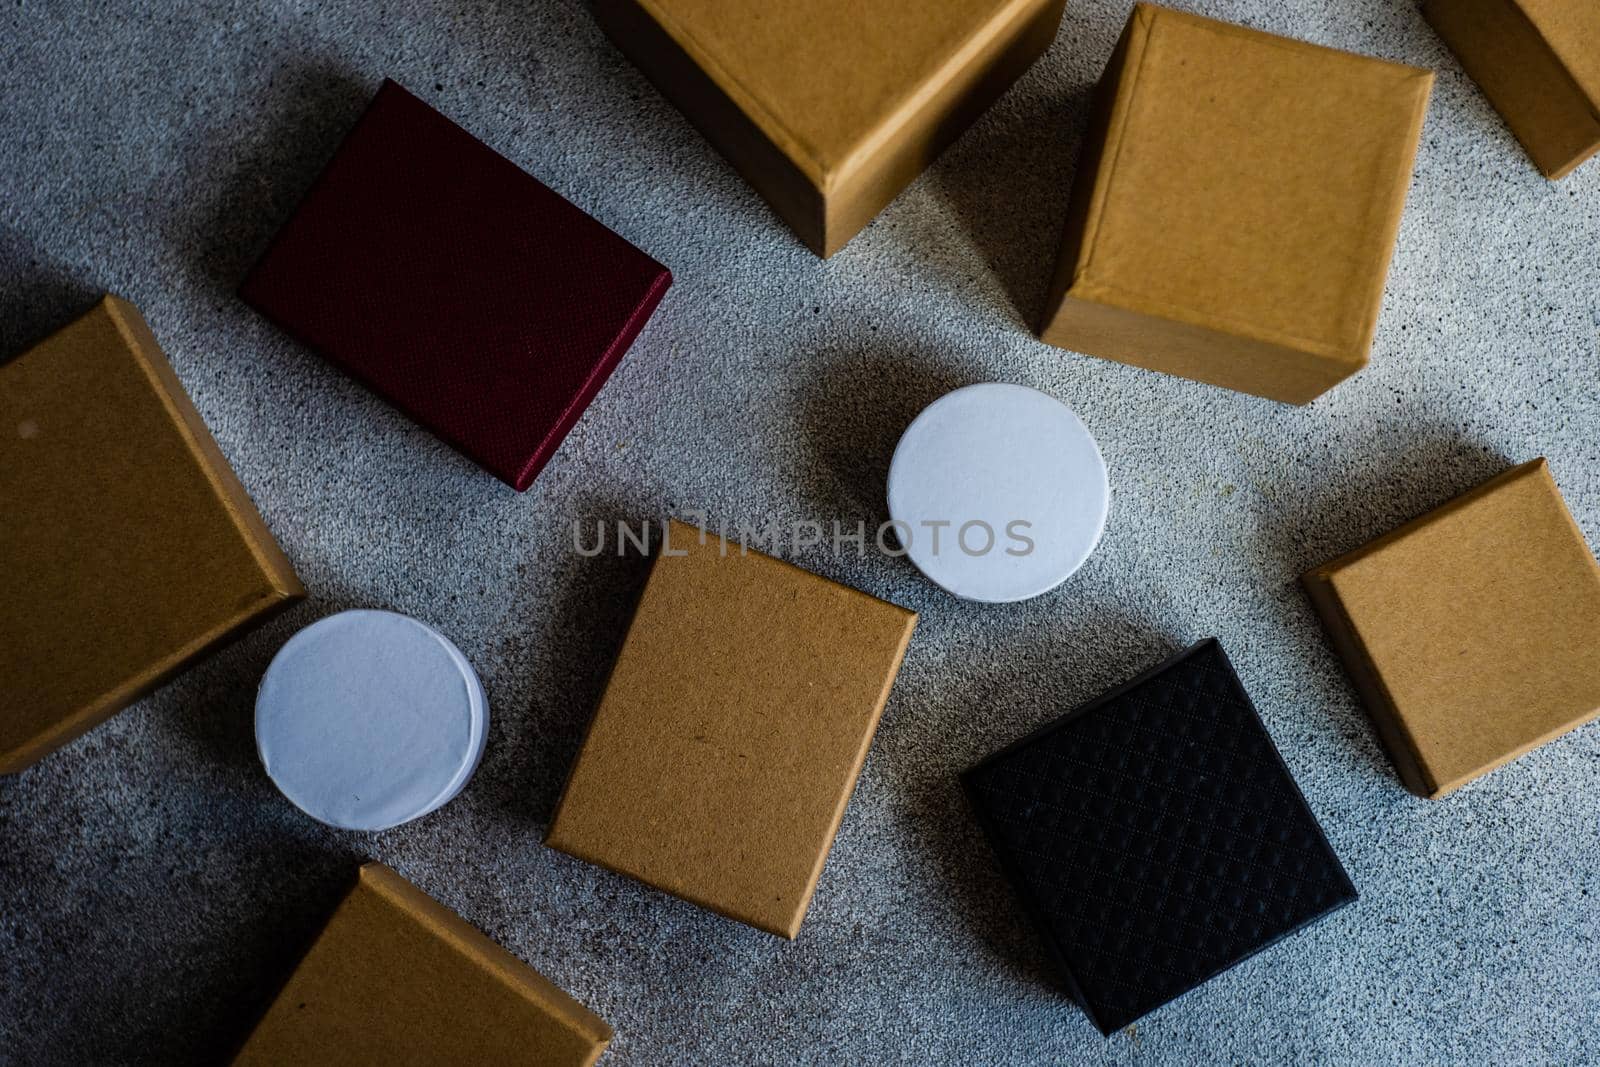 Variety of gift boxes on concrete background